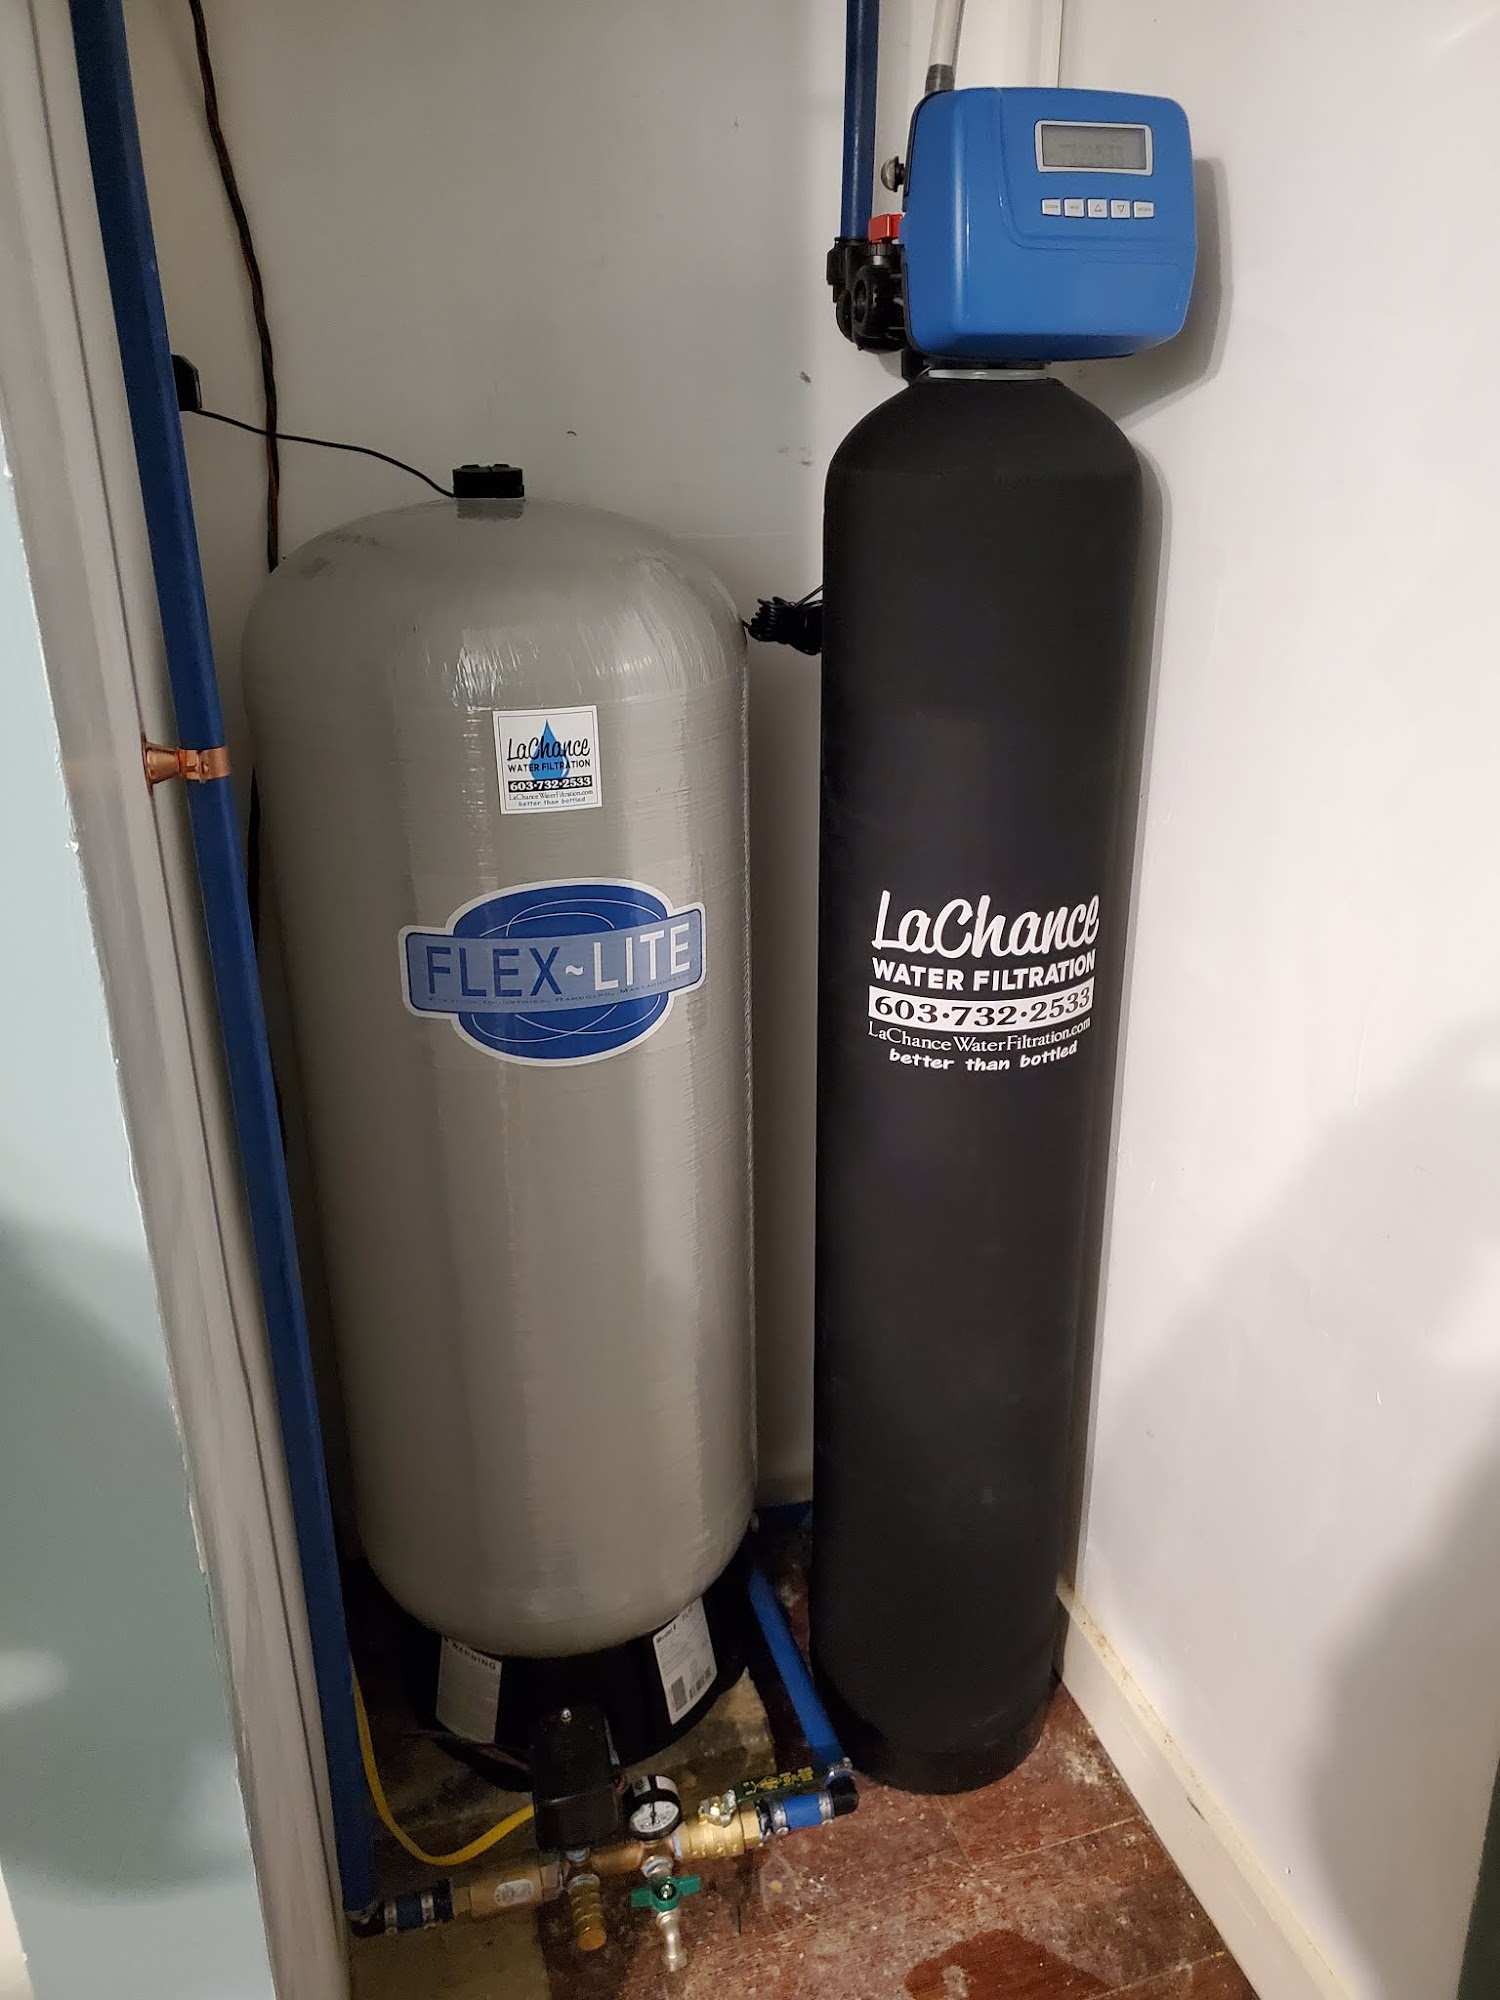 LaChance Water Filtration 200 Laconia Rd, Tilton New Hampshire 03276